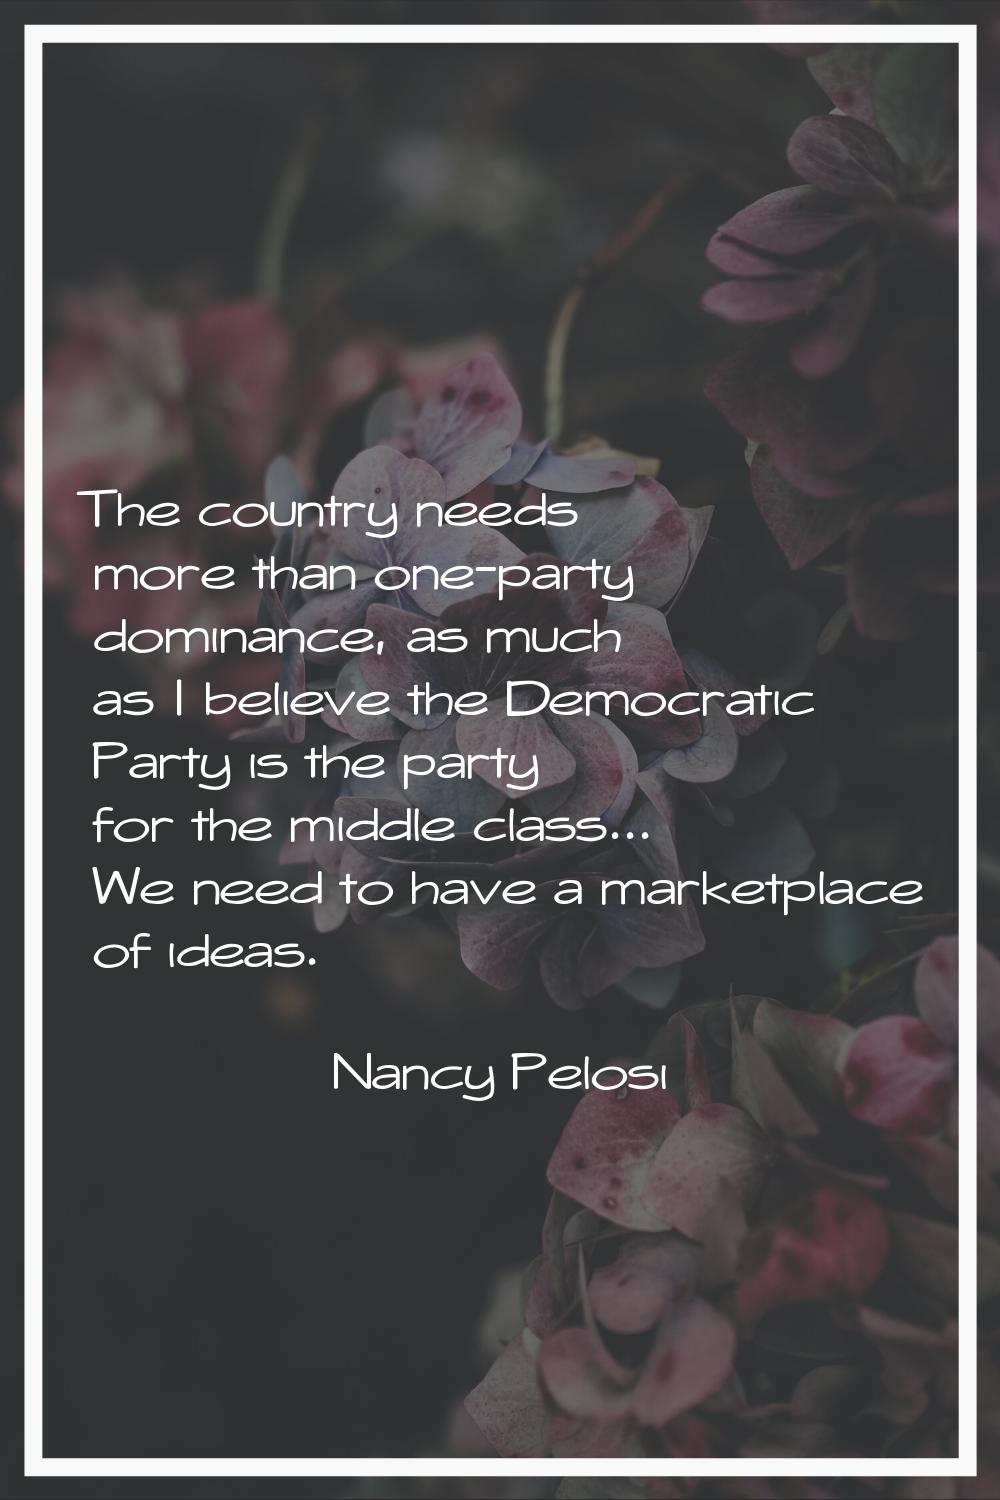 The country needs more than one-party dominance, as much as I believe the Democratic Party is the p